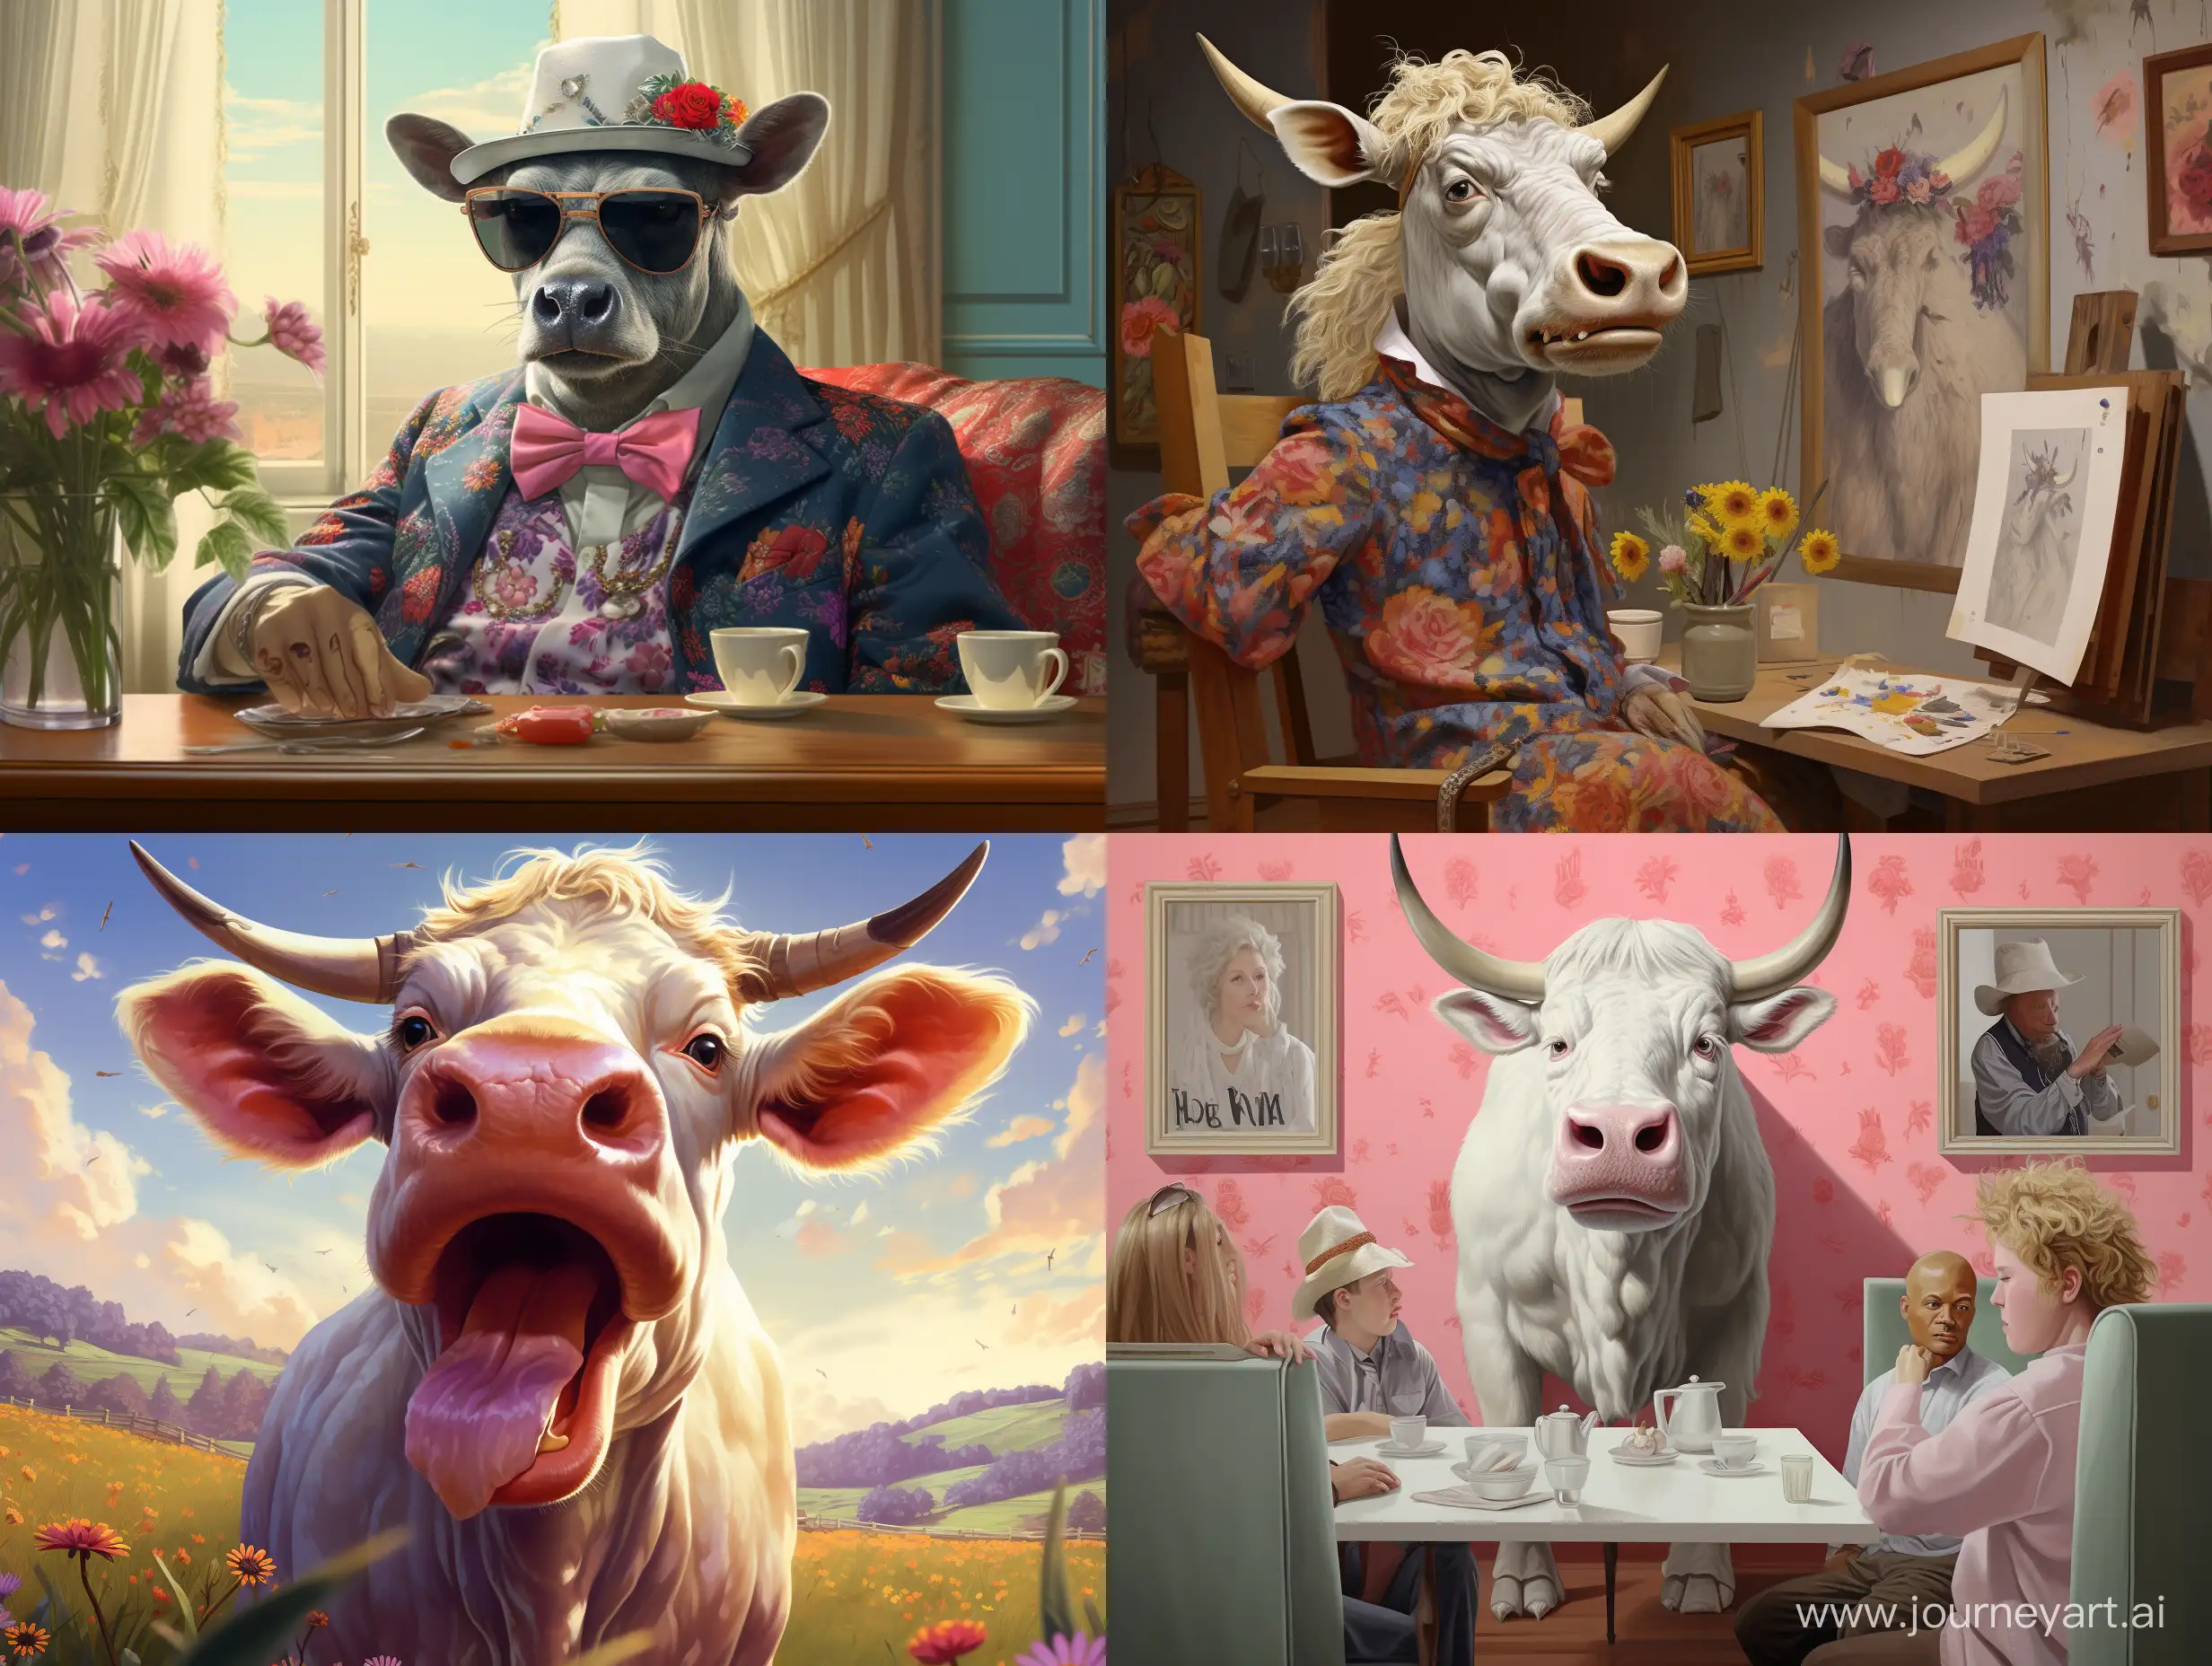 Whimsical-Cow-Art-in-43-Aspect-Ratio-Playful-and-Colorful-Animal-Illustration